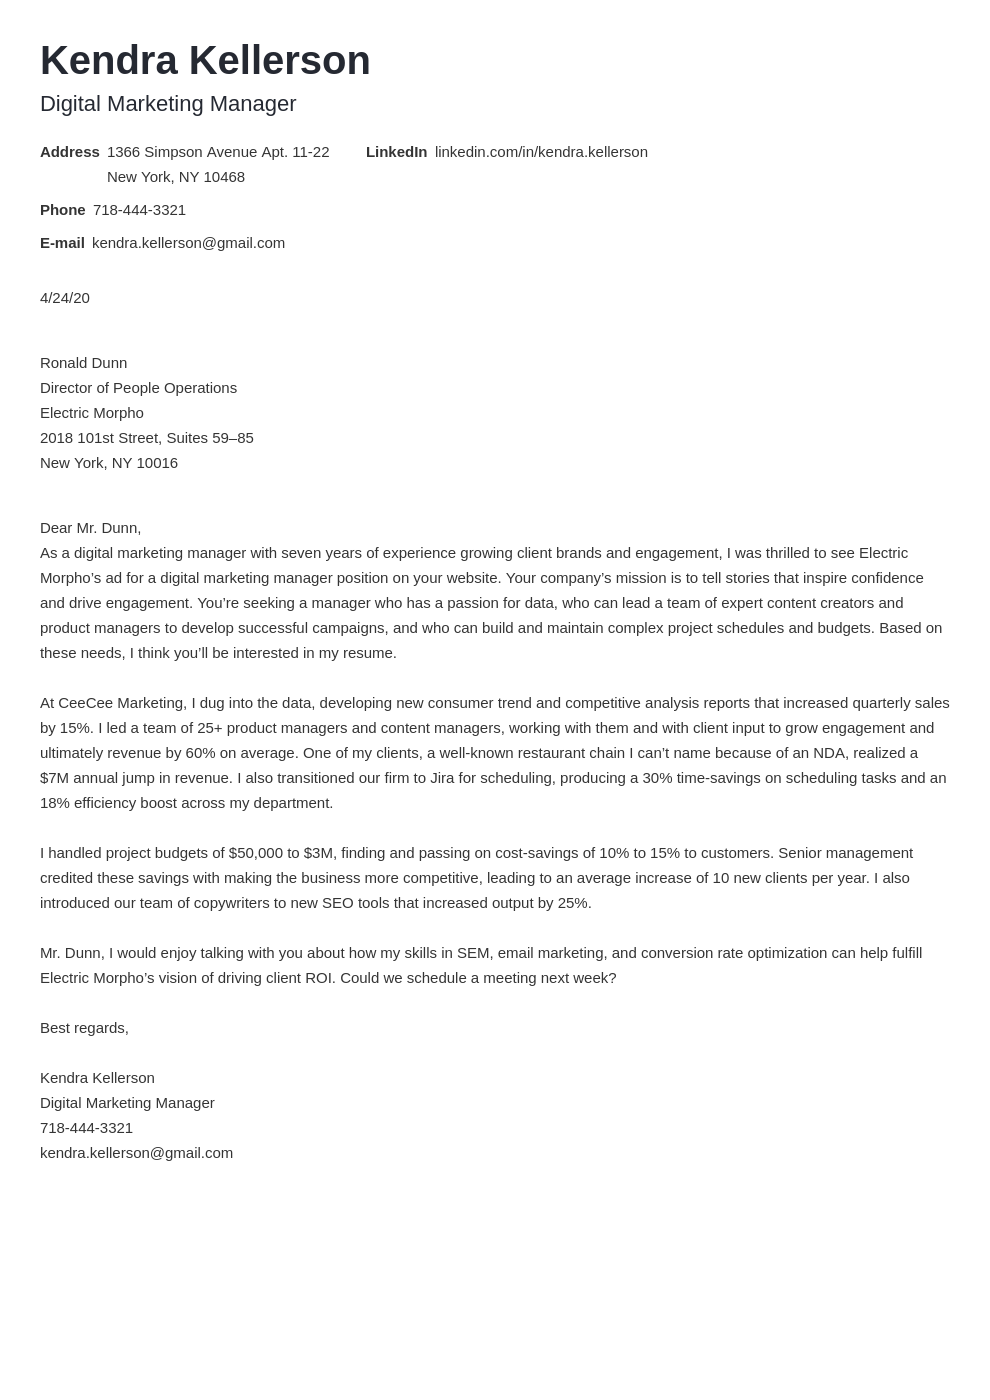 professional cover letter for marketing position